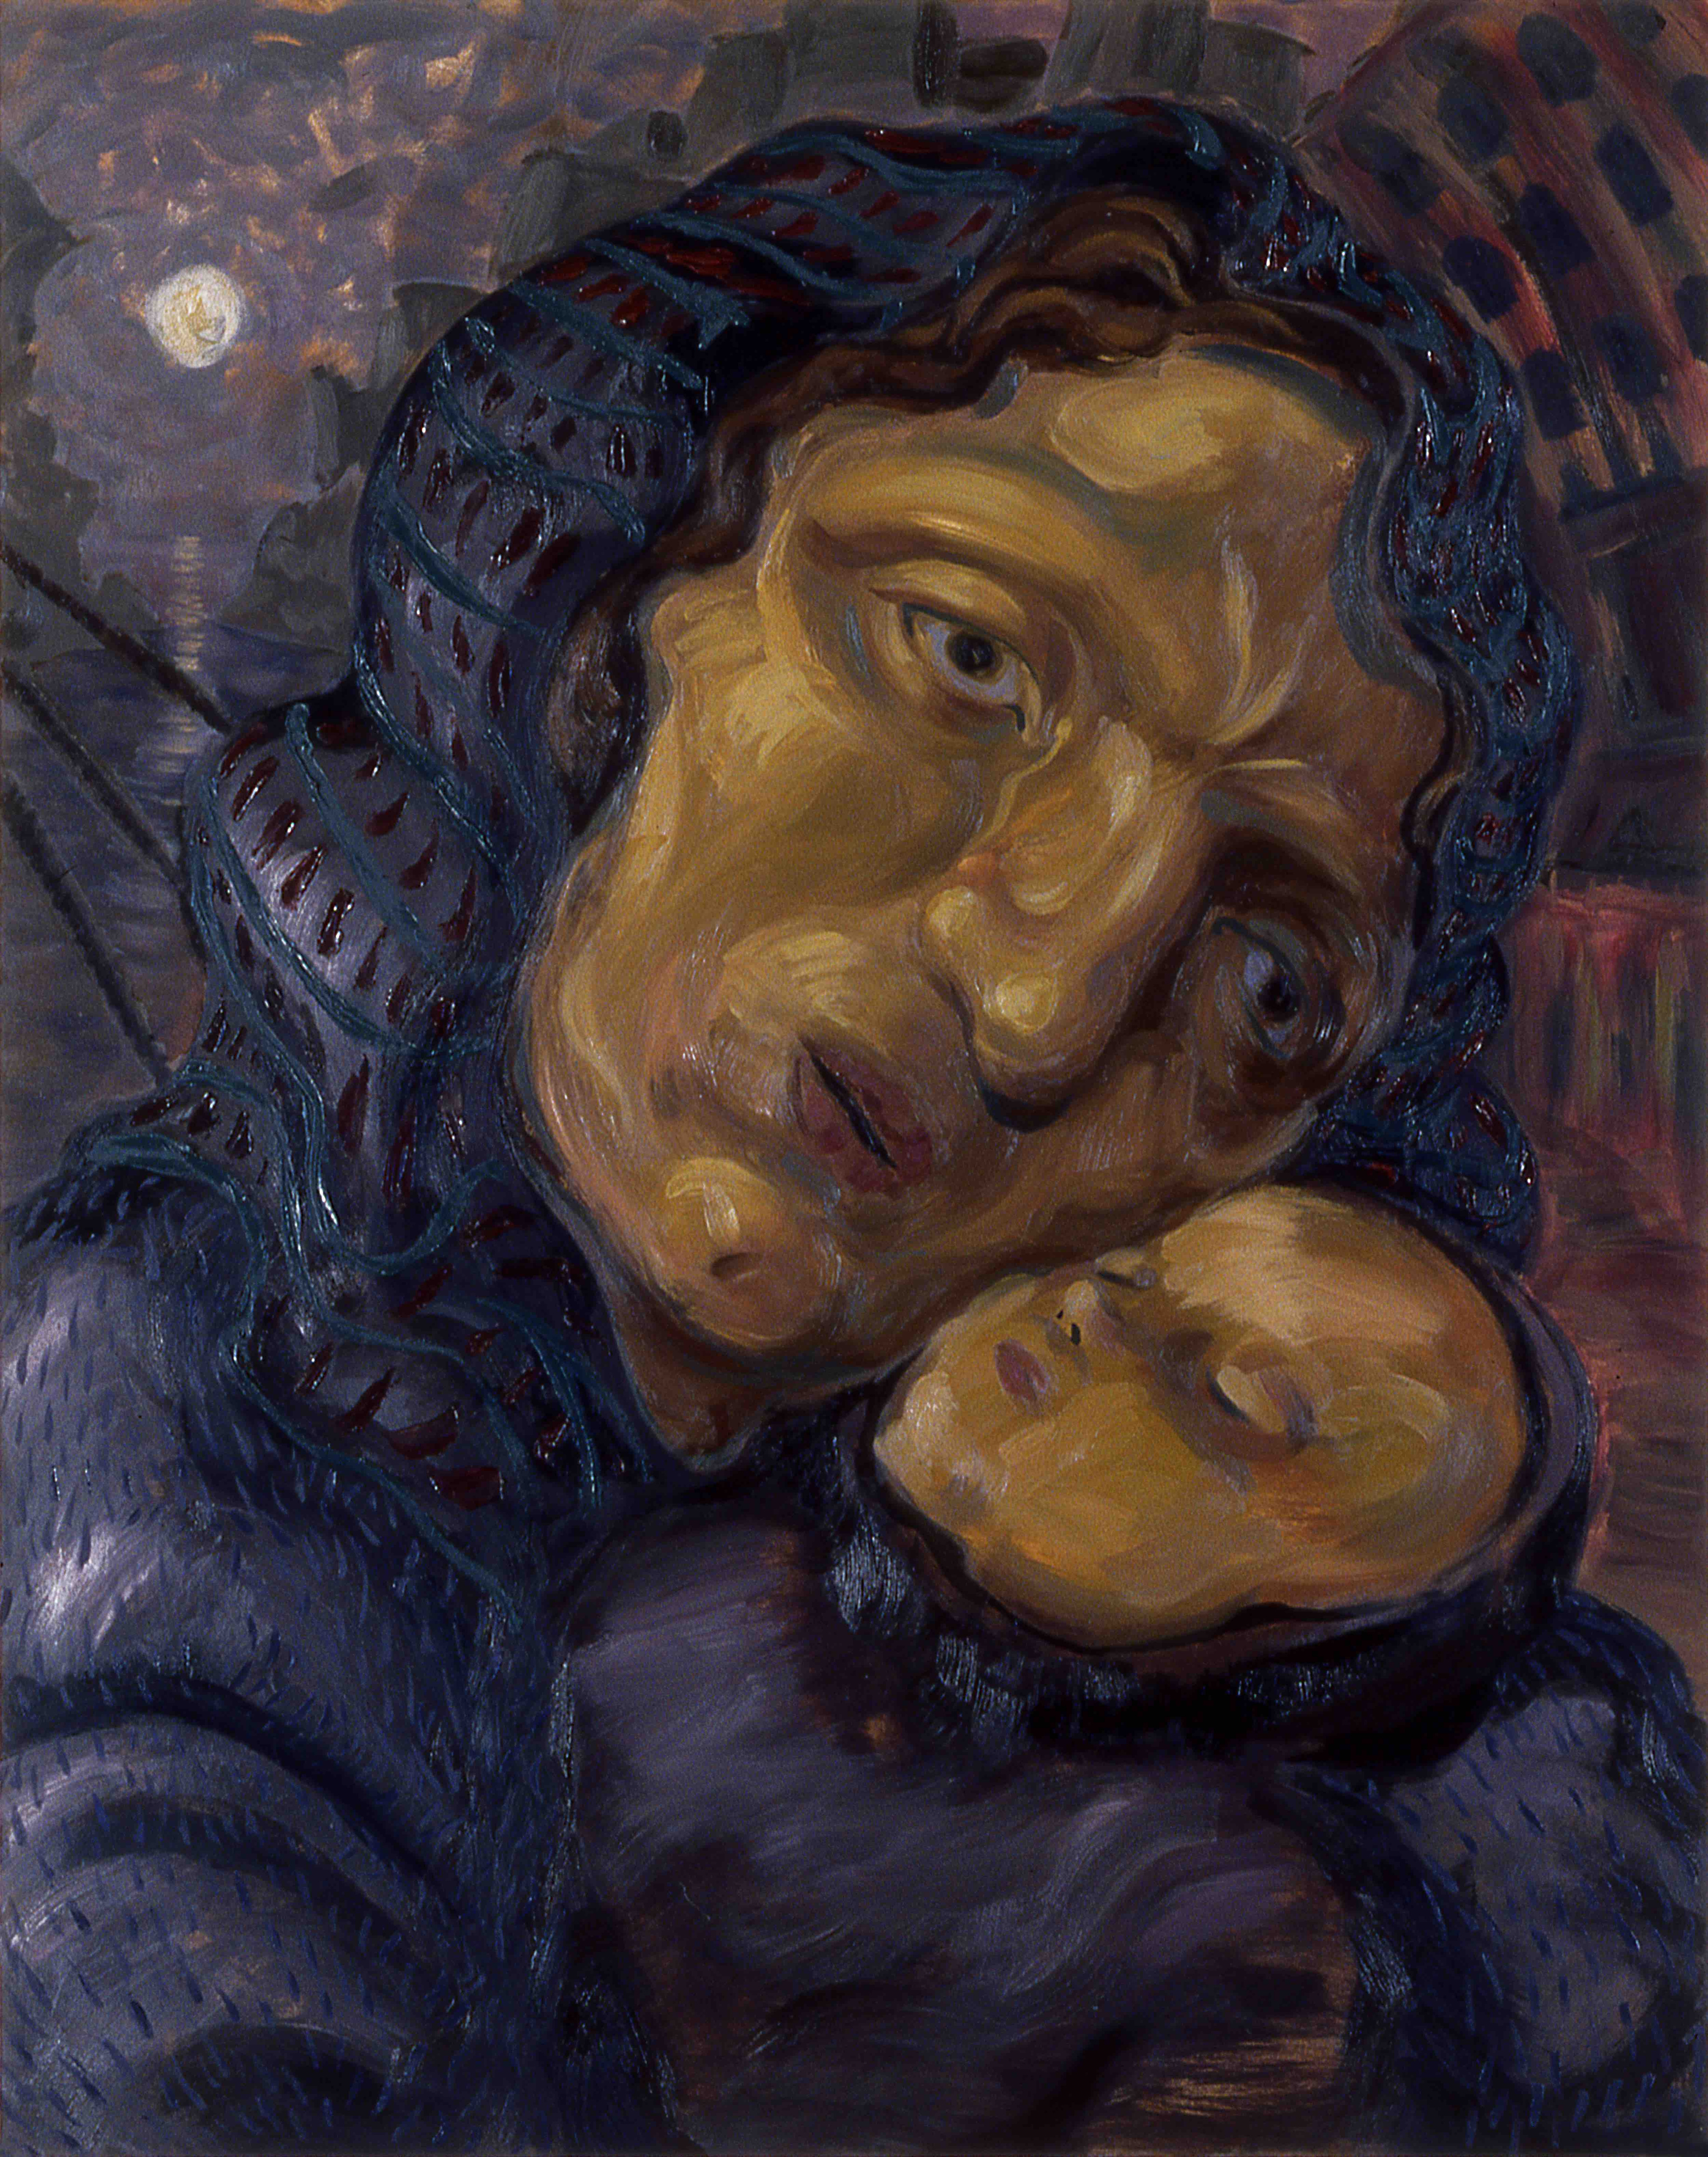 THE IMMIGRANT, painted by Vince Mancuso in 1990, oil on canvas 4x5 feet. Available